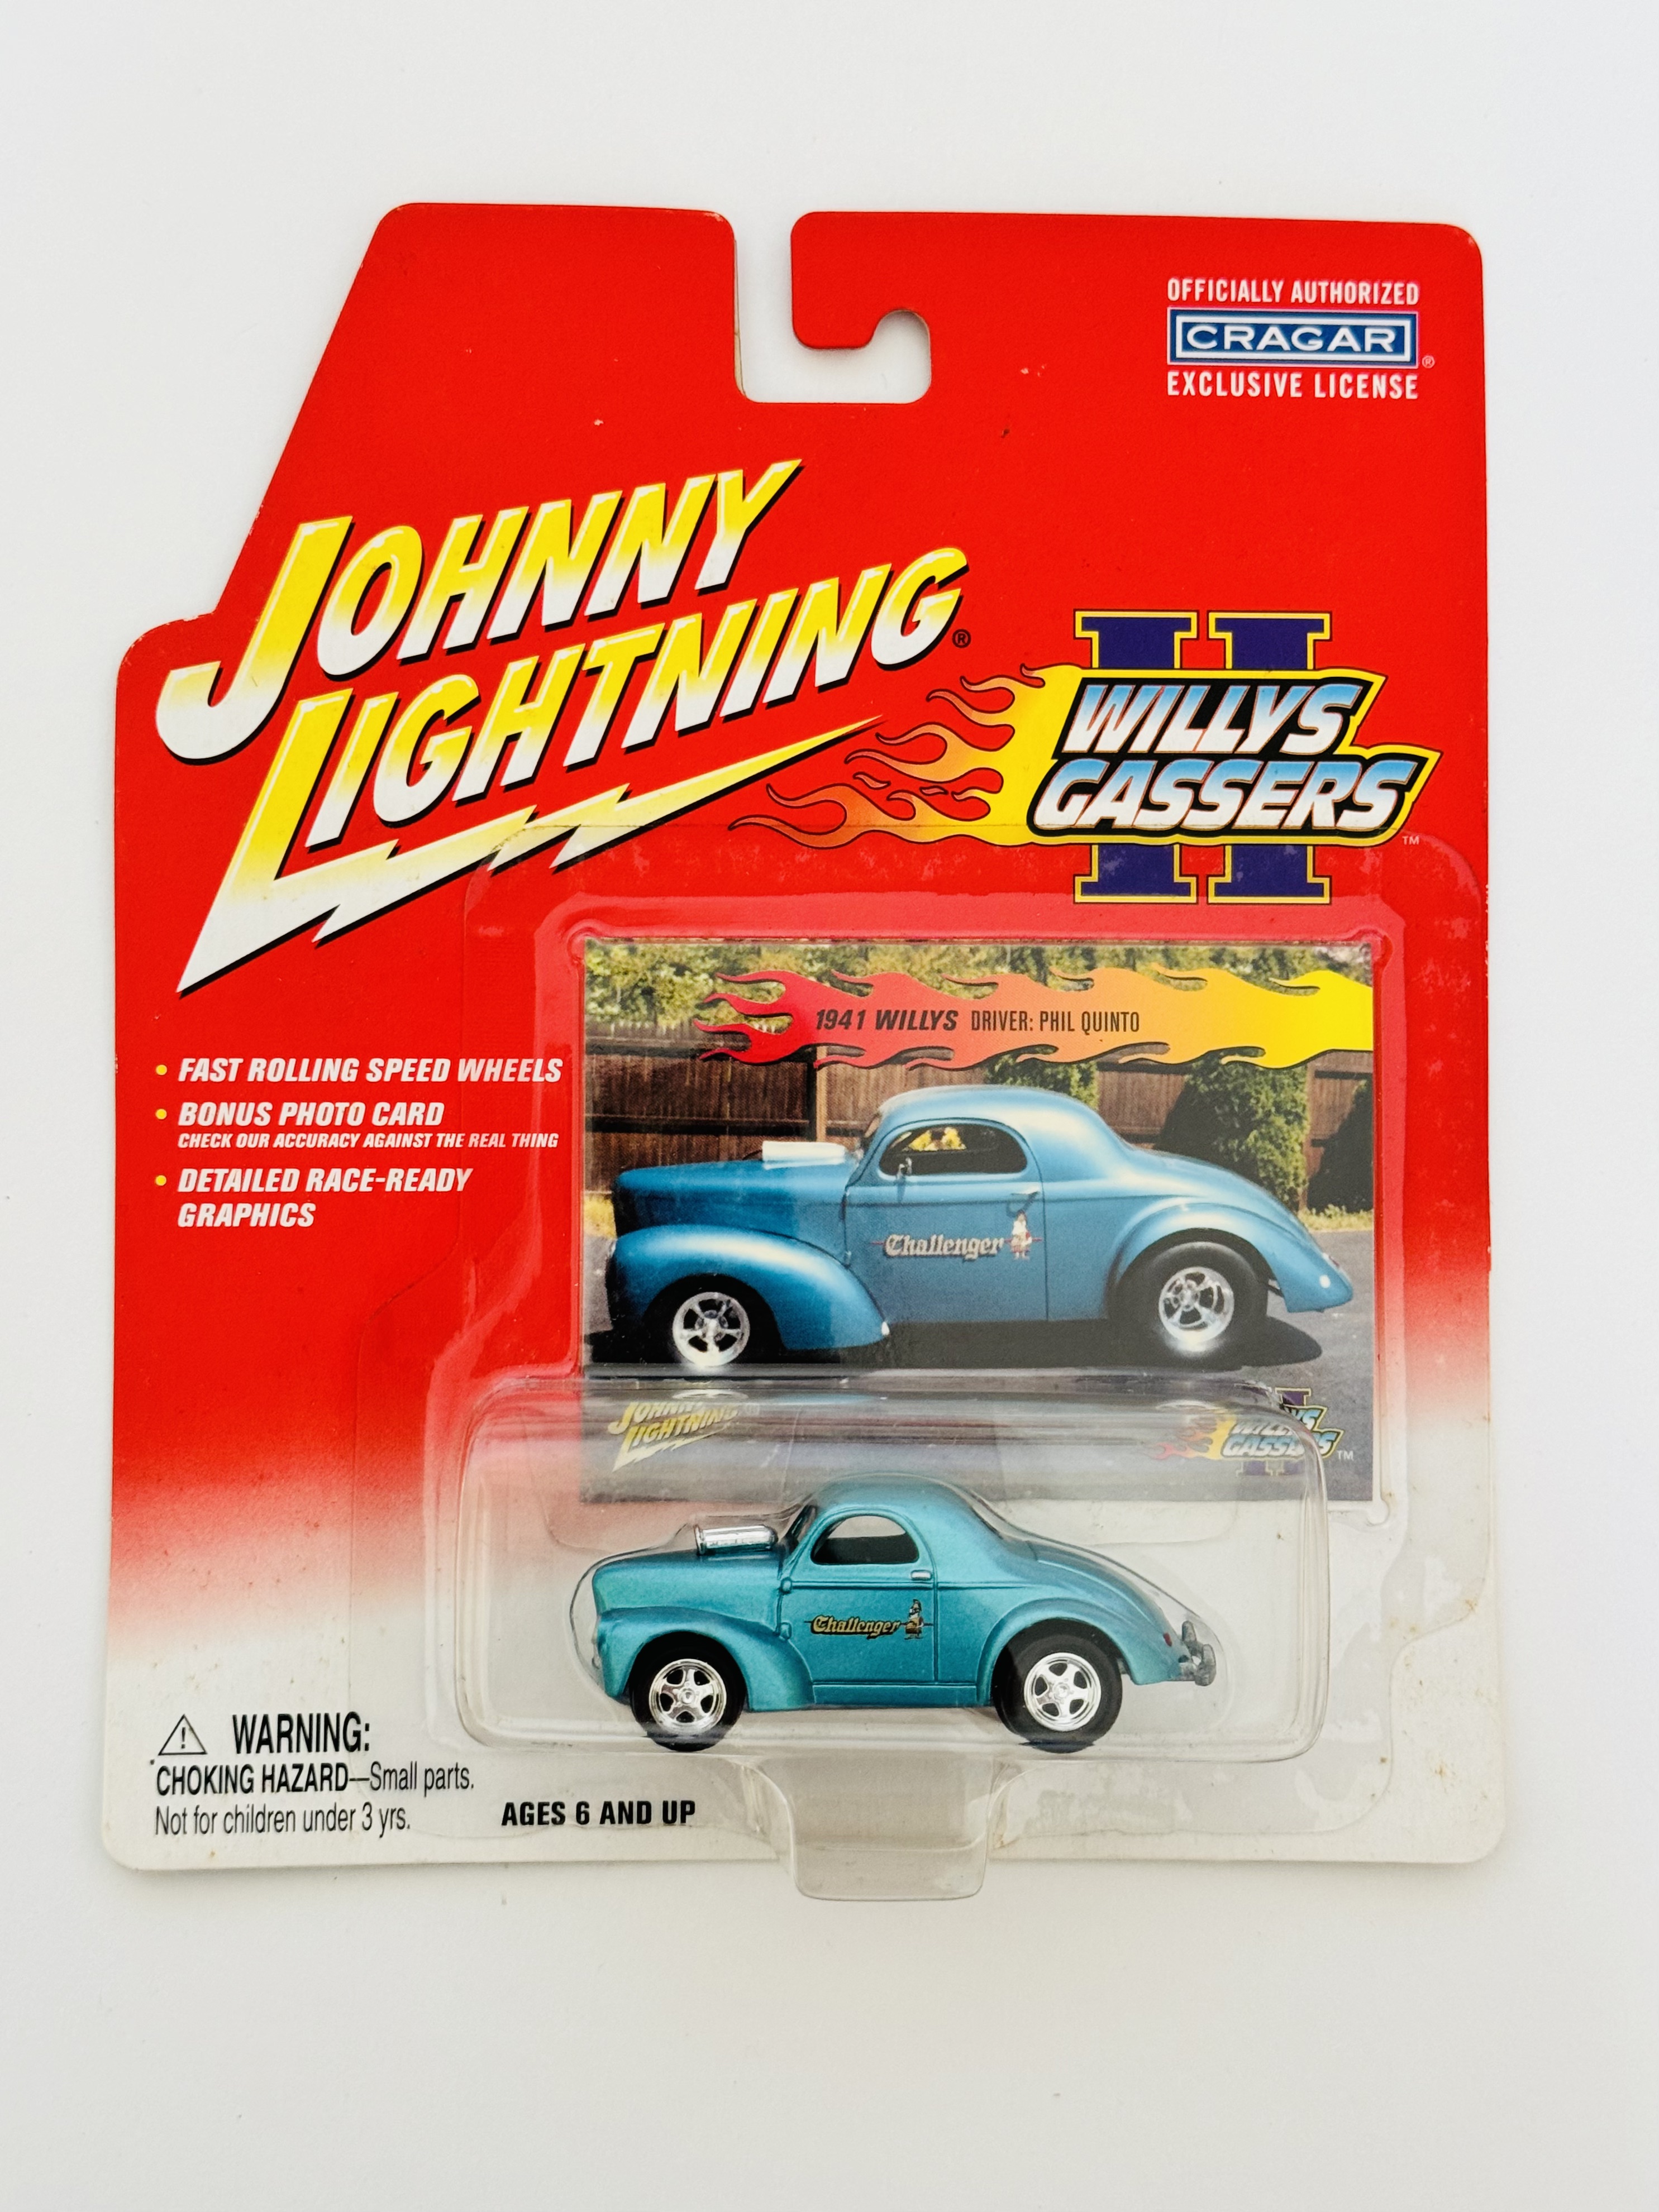 Johnny Lightning Willys Gassers Phil Quinto 1941 Willys